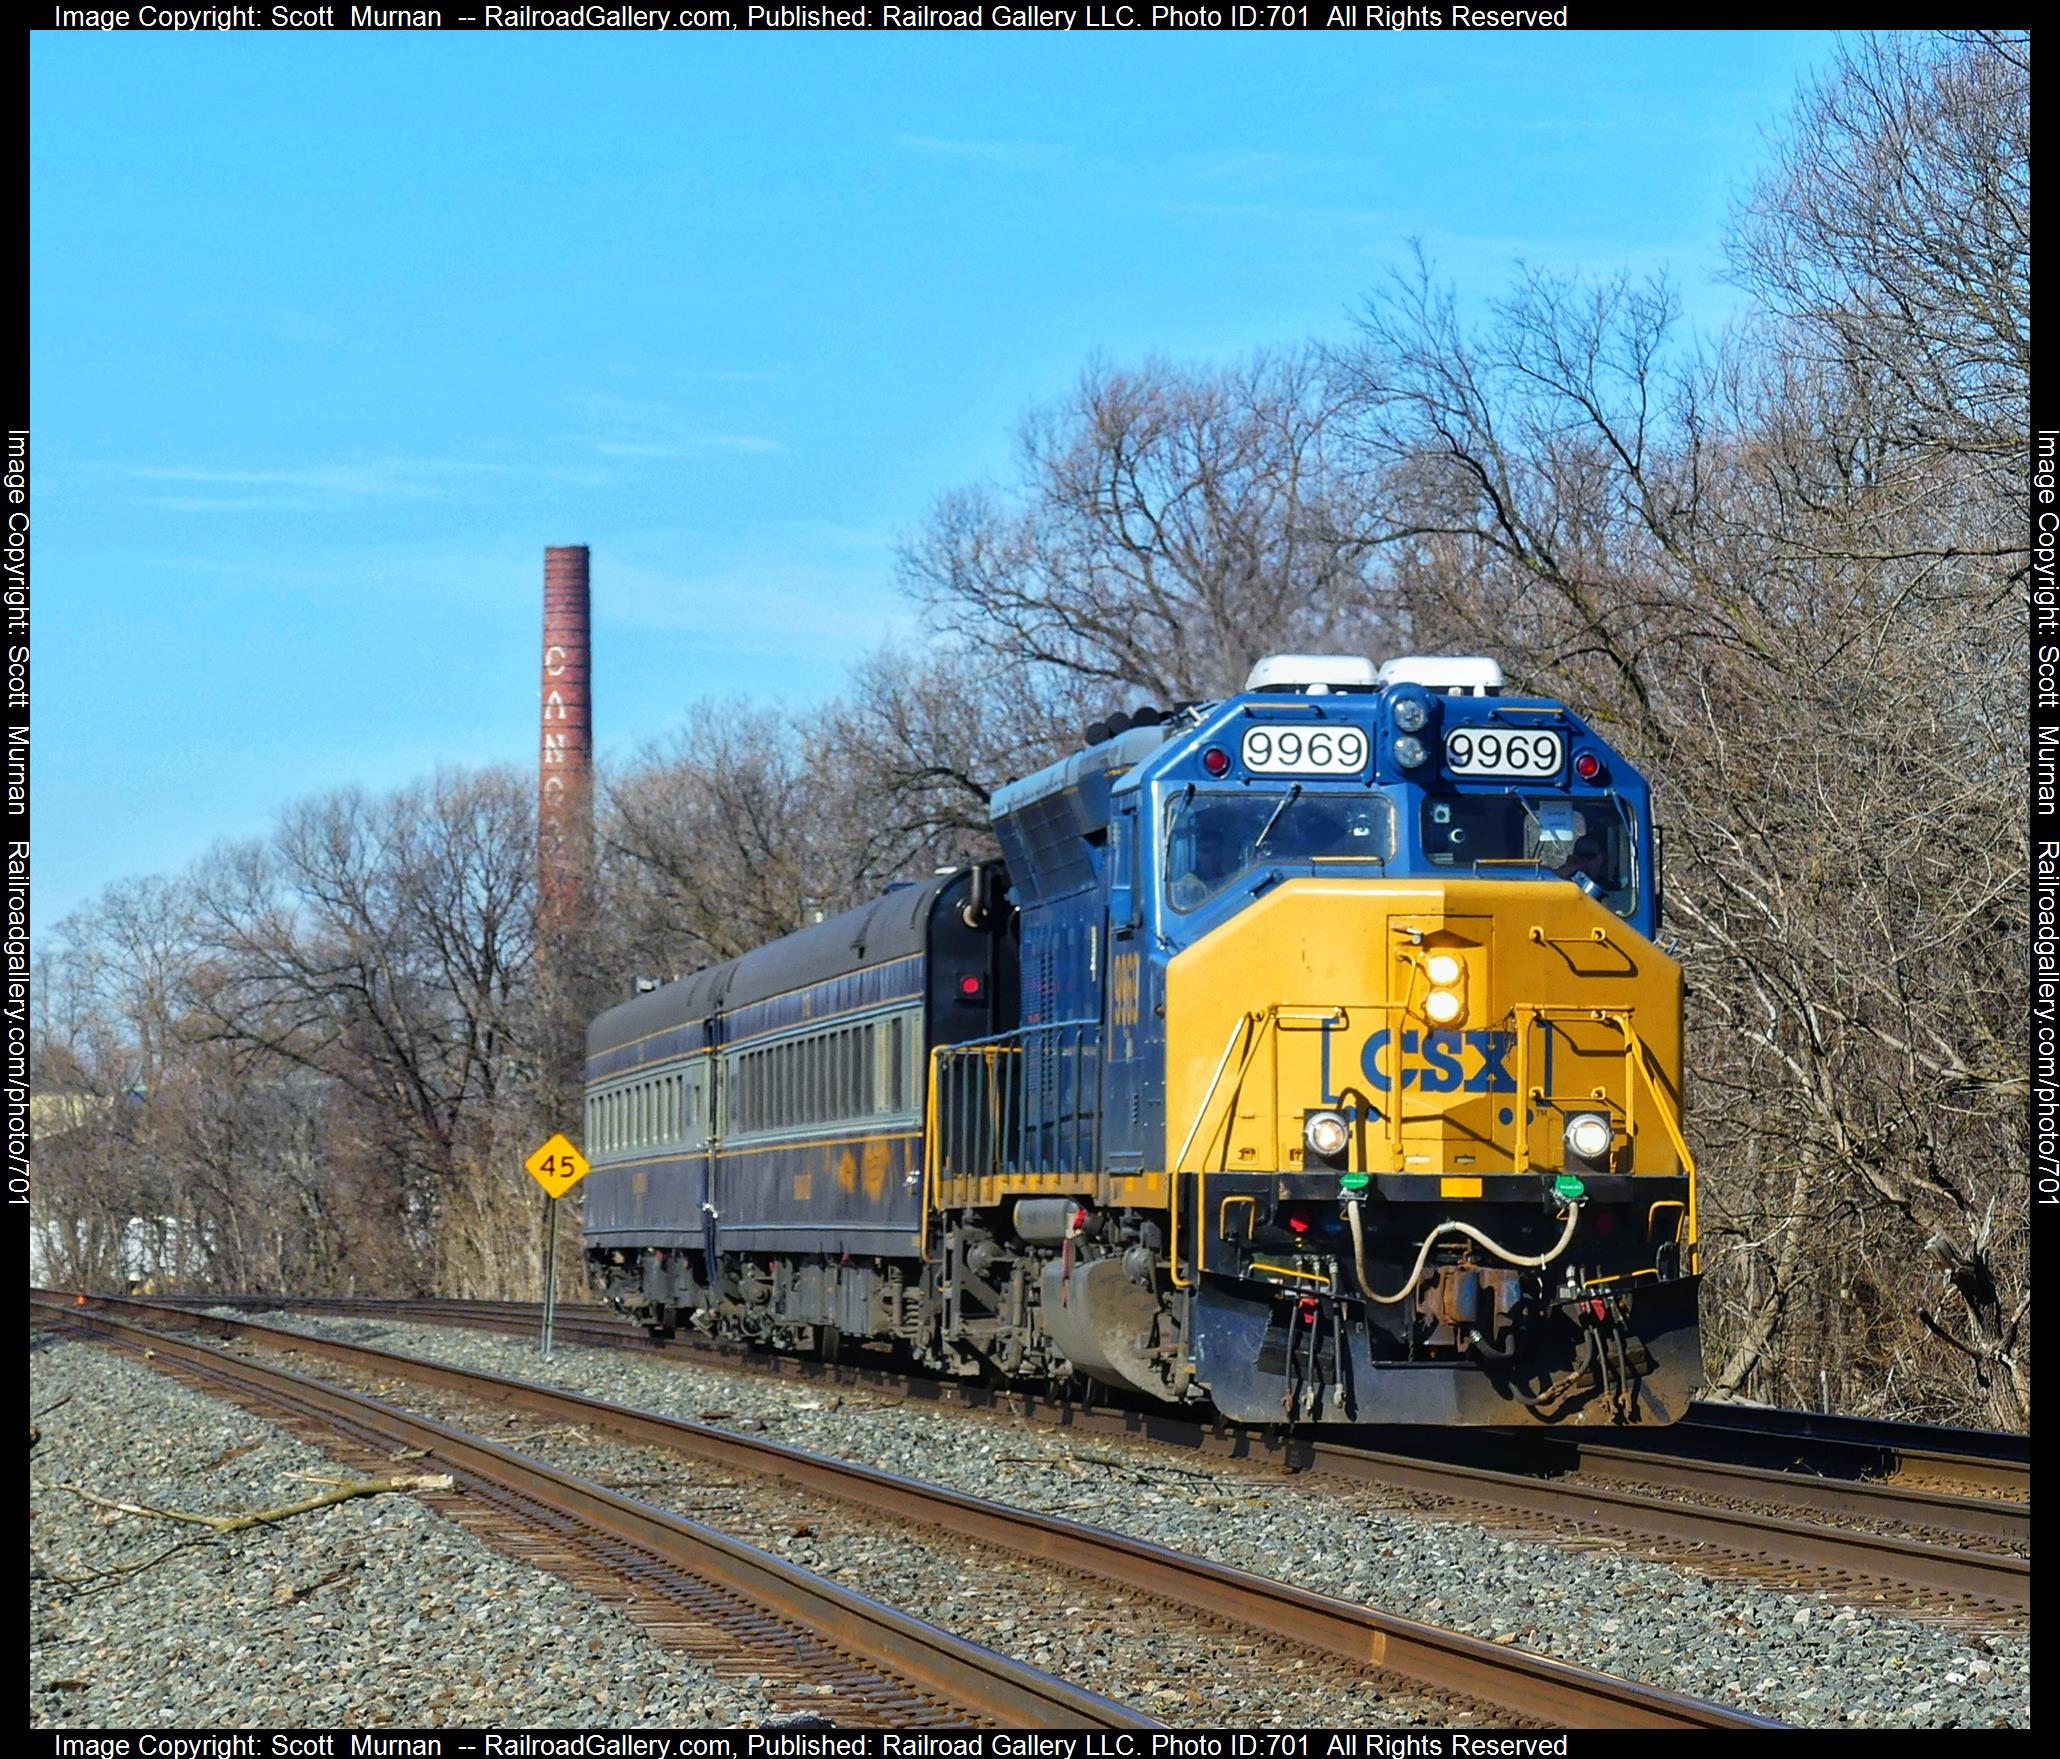 CSX 9969 is a class EMD GP40WH-2  and  is pictured in Fairport , New York, United States.  This was taken along the Rochester Subdivision  on the CSX Transportation. Photo Copyright: Scott  Murnan  uploaded to Railroad Gallery on 02/16/2023. This photograph of CSX 9969 was taken on Tuesday, February 14, 2023. All Rights Reserved. 